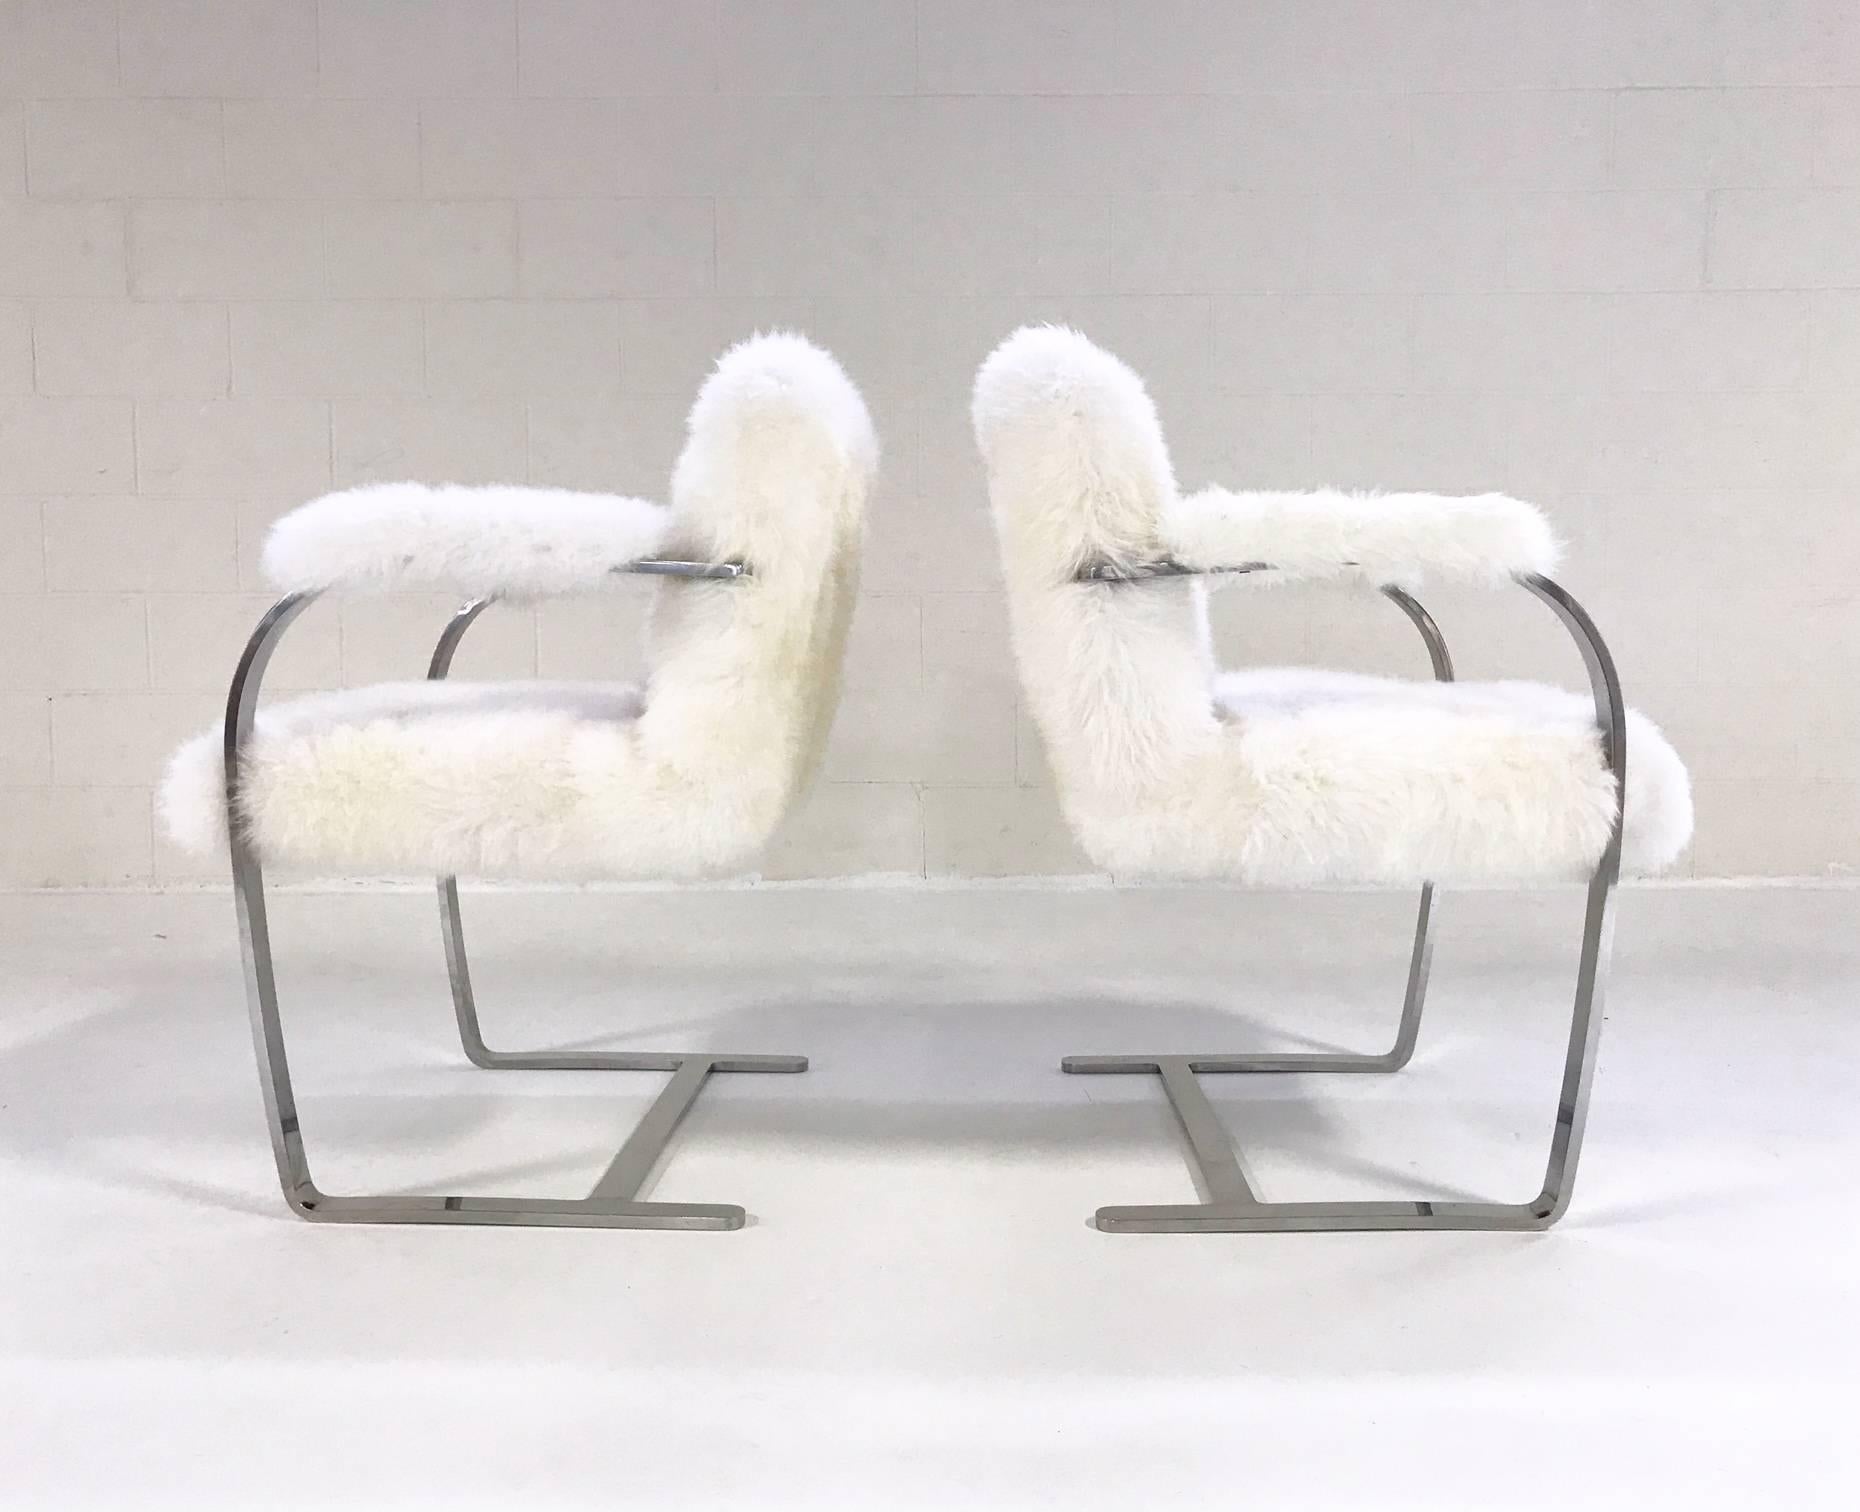 Mies Van Der Rohe Brno Chairs for Knoll in New Zealand Sheepskin - Pair 2